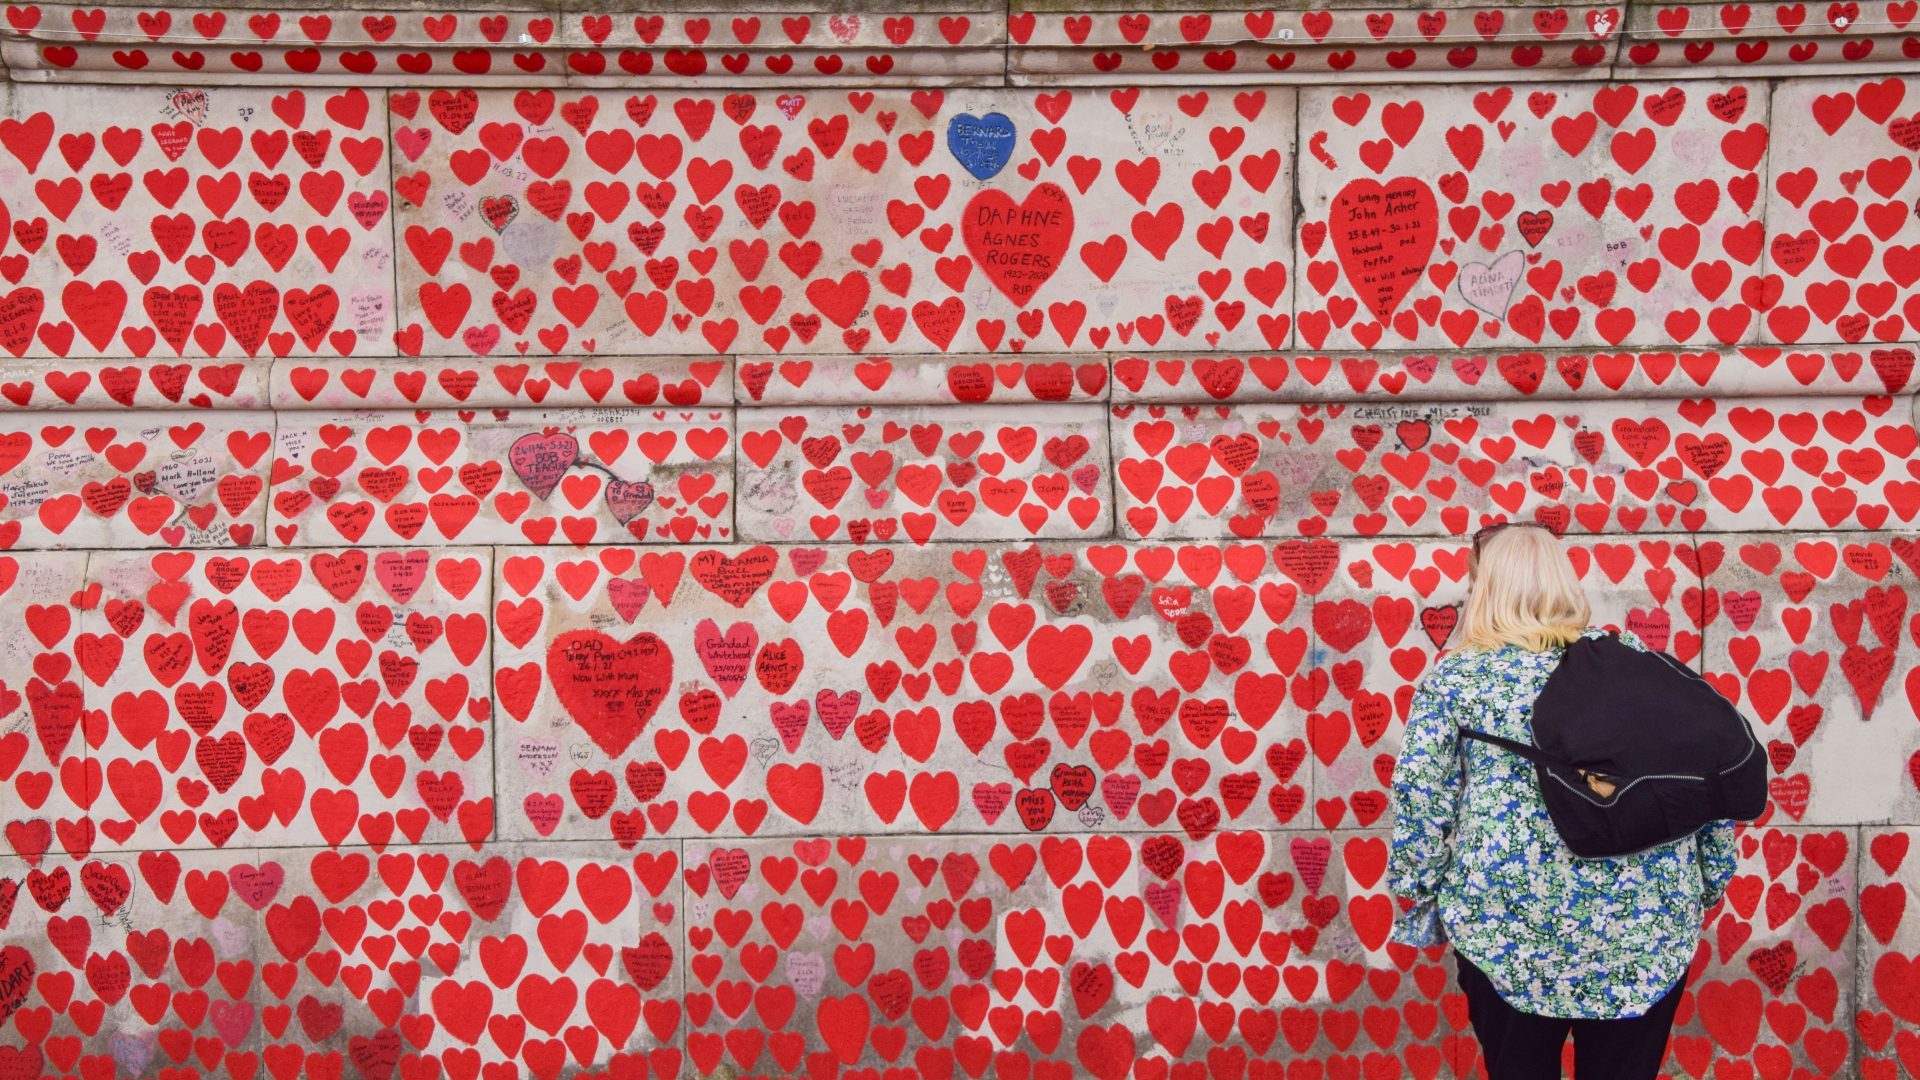 A woman reads tributes on the National Covid Memorial Wall in London as the UK Covid-19 inquiry continues. Photo: Vuc Valcic/SOPA Images/LightRocket/Getty